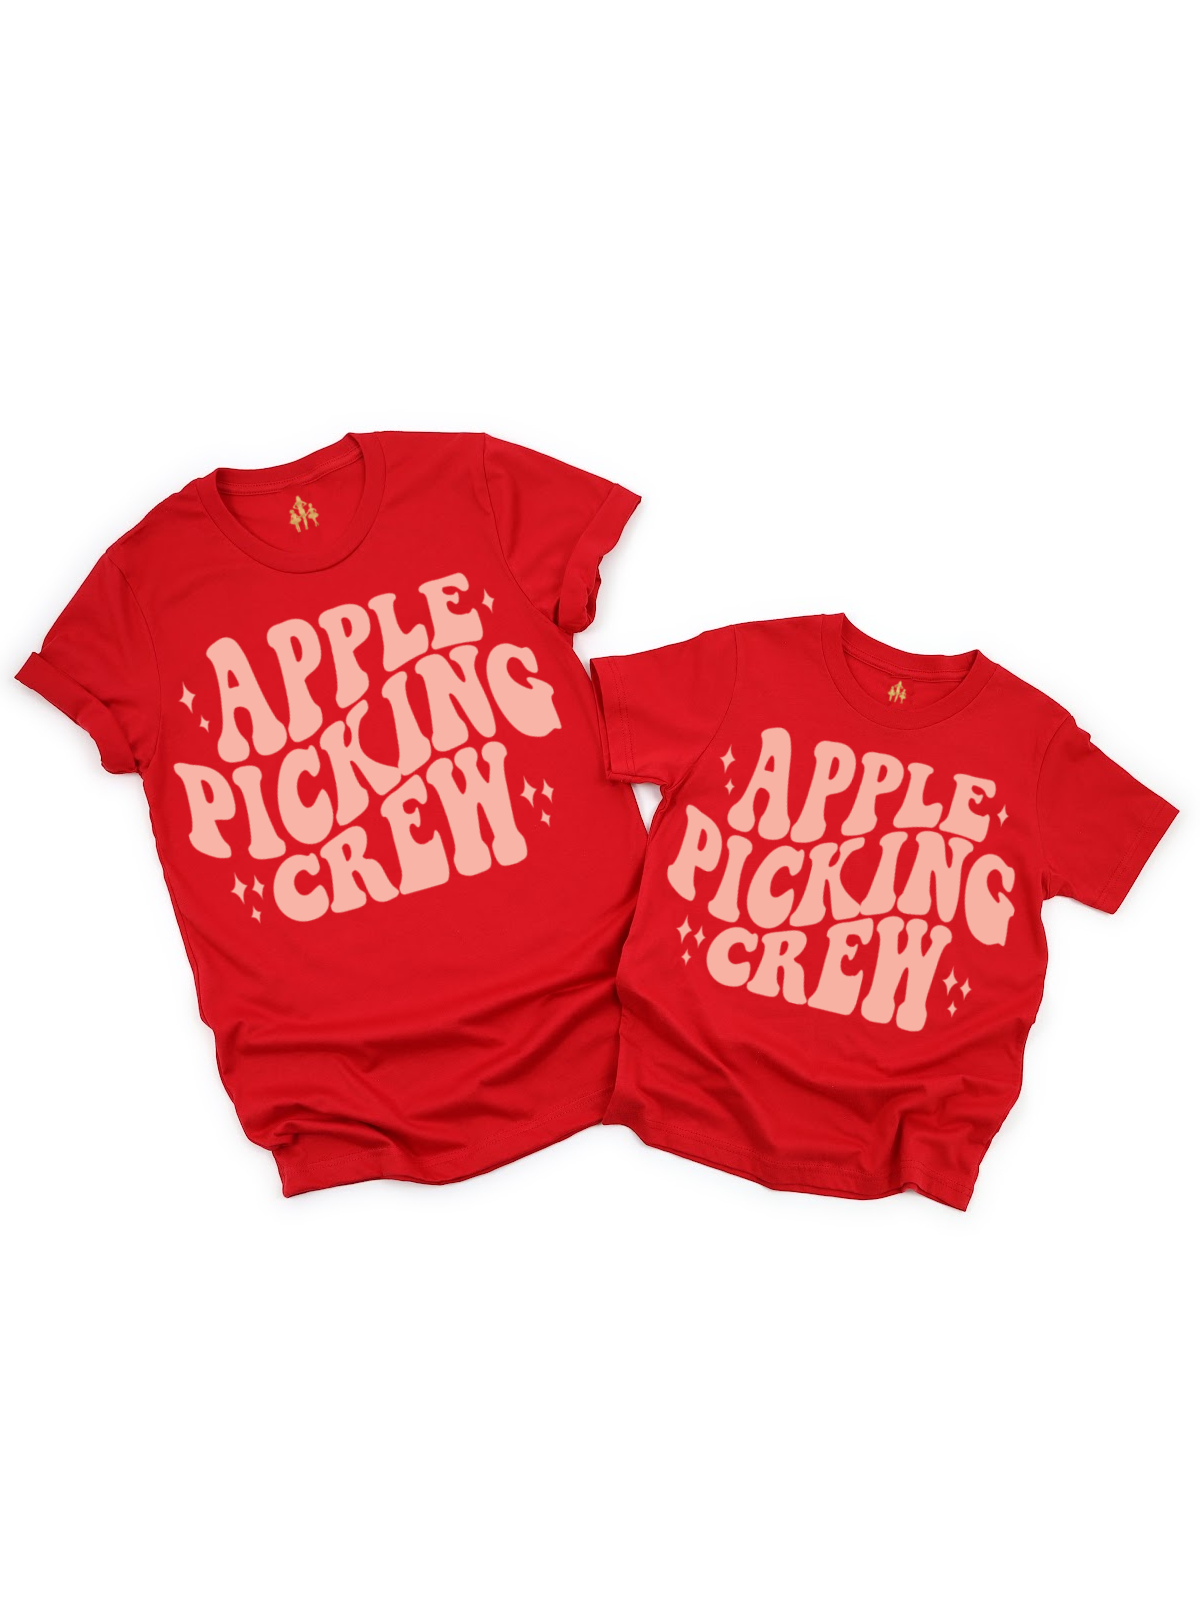 Apple Picking Crew Mommy and Me Matching Shirts